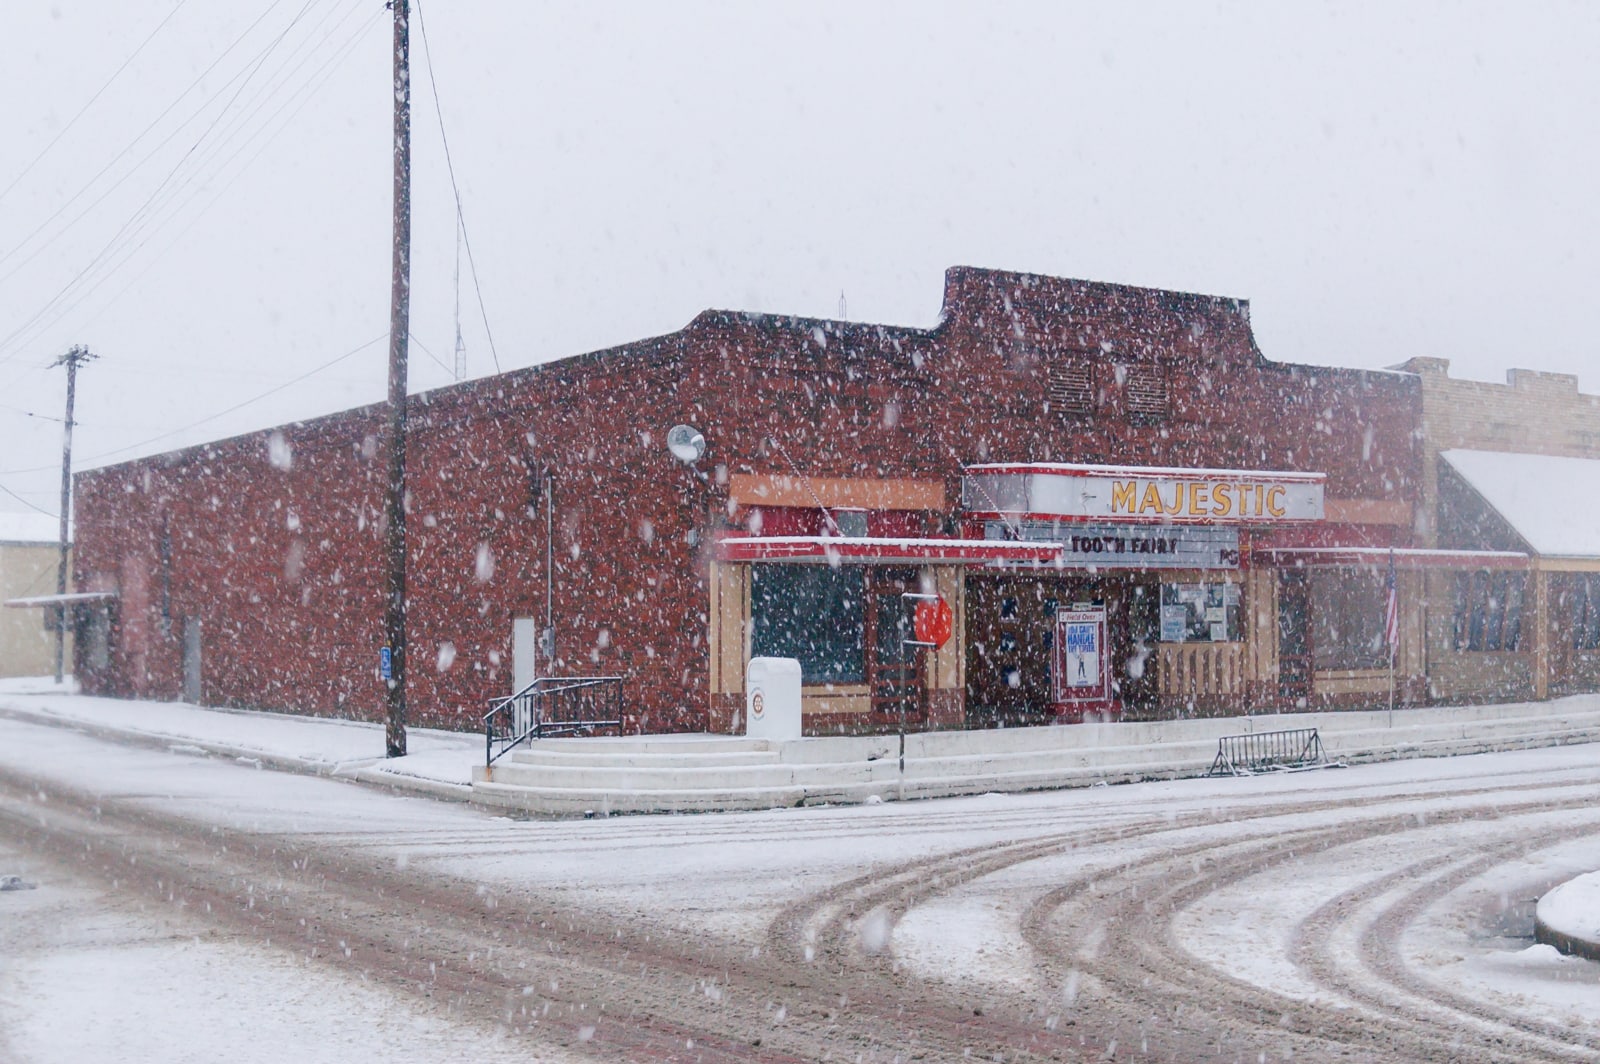 The Majestic Theater in a Wills Point snowstorm